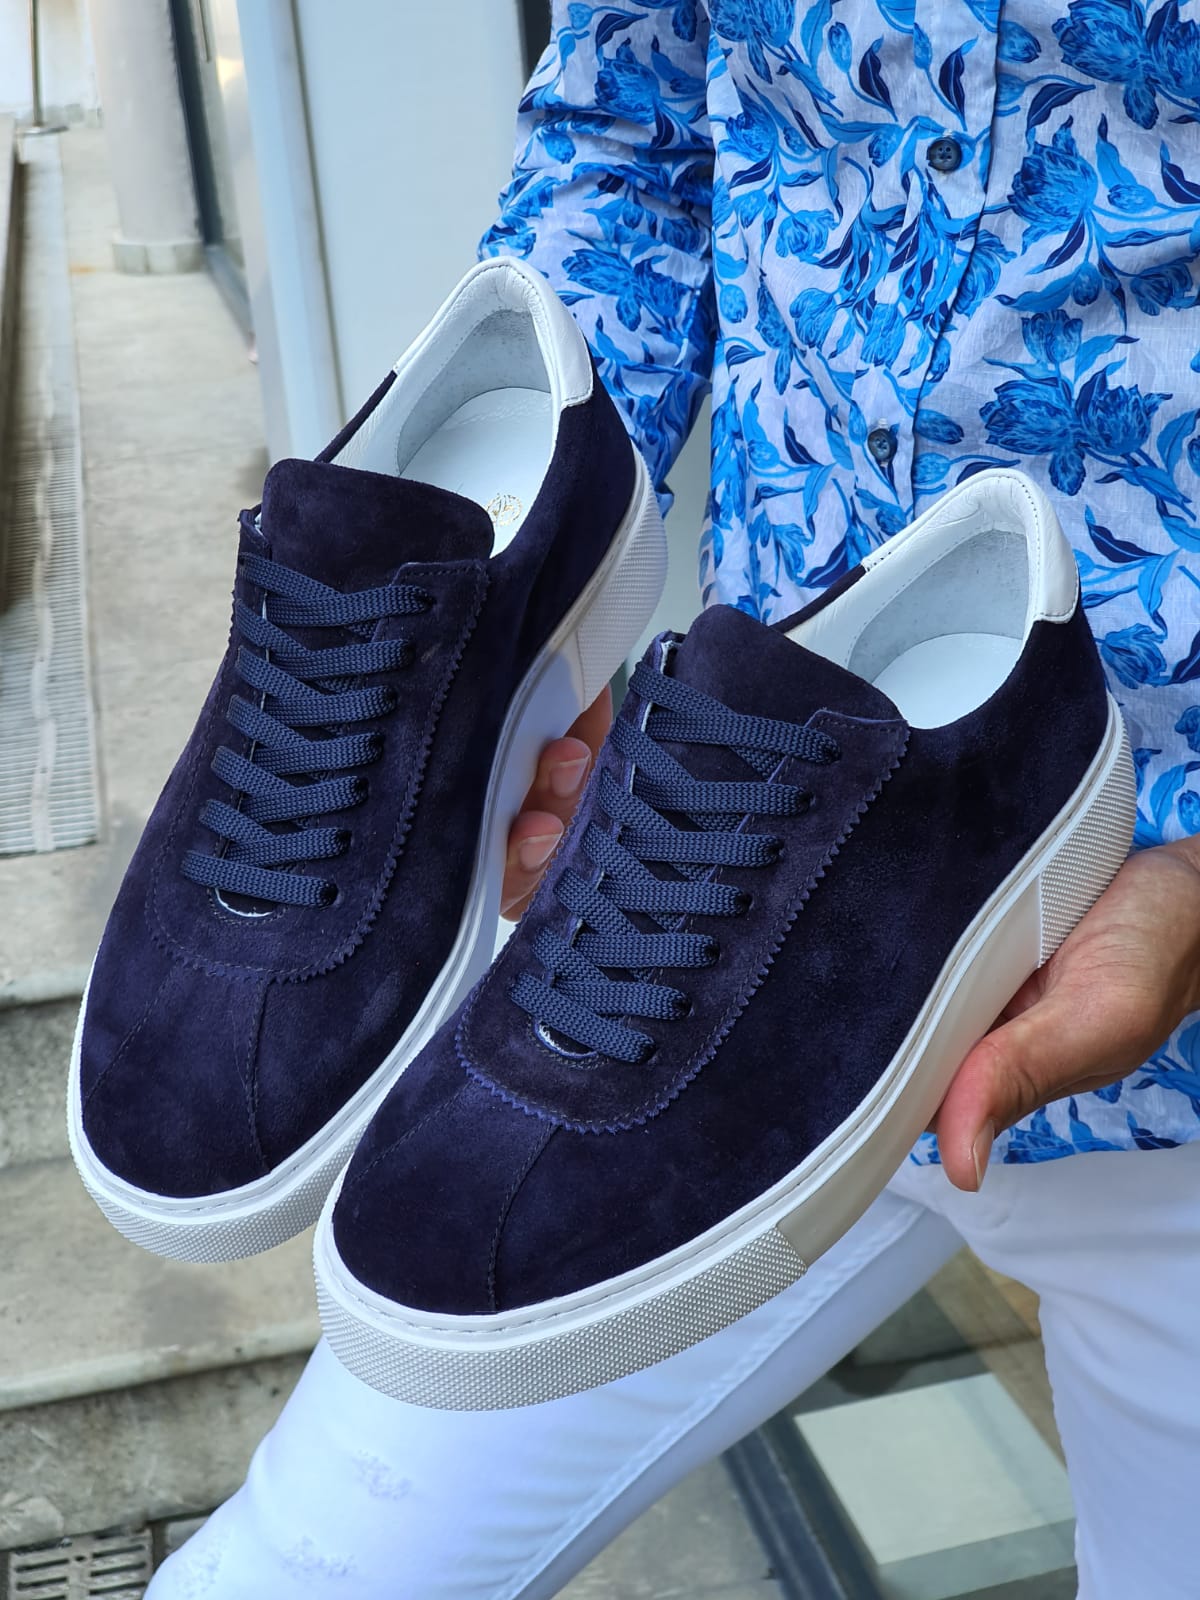 Mere end noget andet Rynke panden kalender Buy Navy Blue Mid Top Suede Sneakers by GentWith.com | Free Shipping